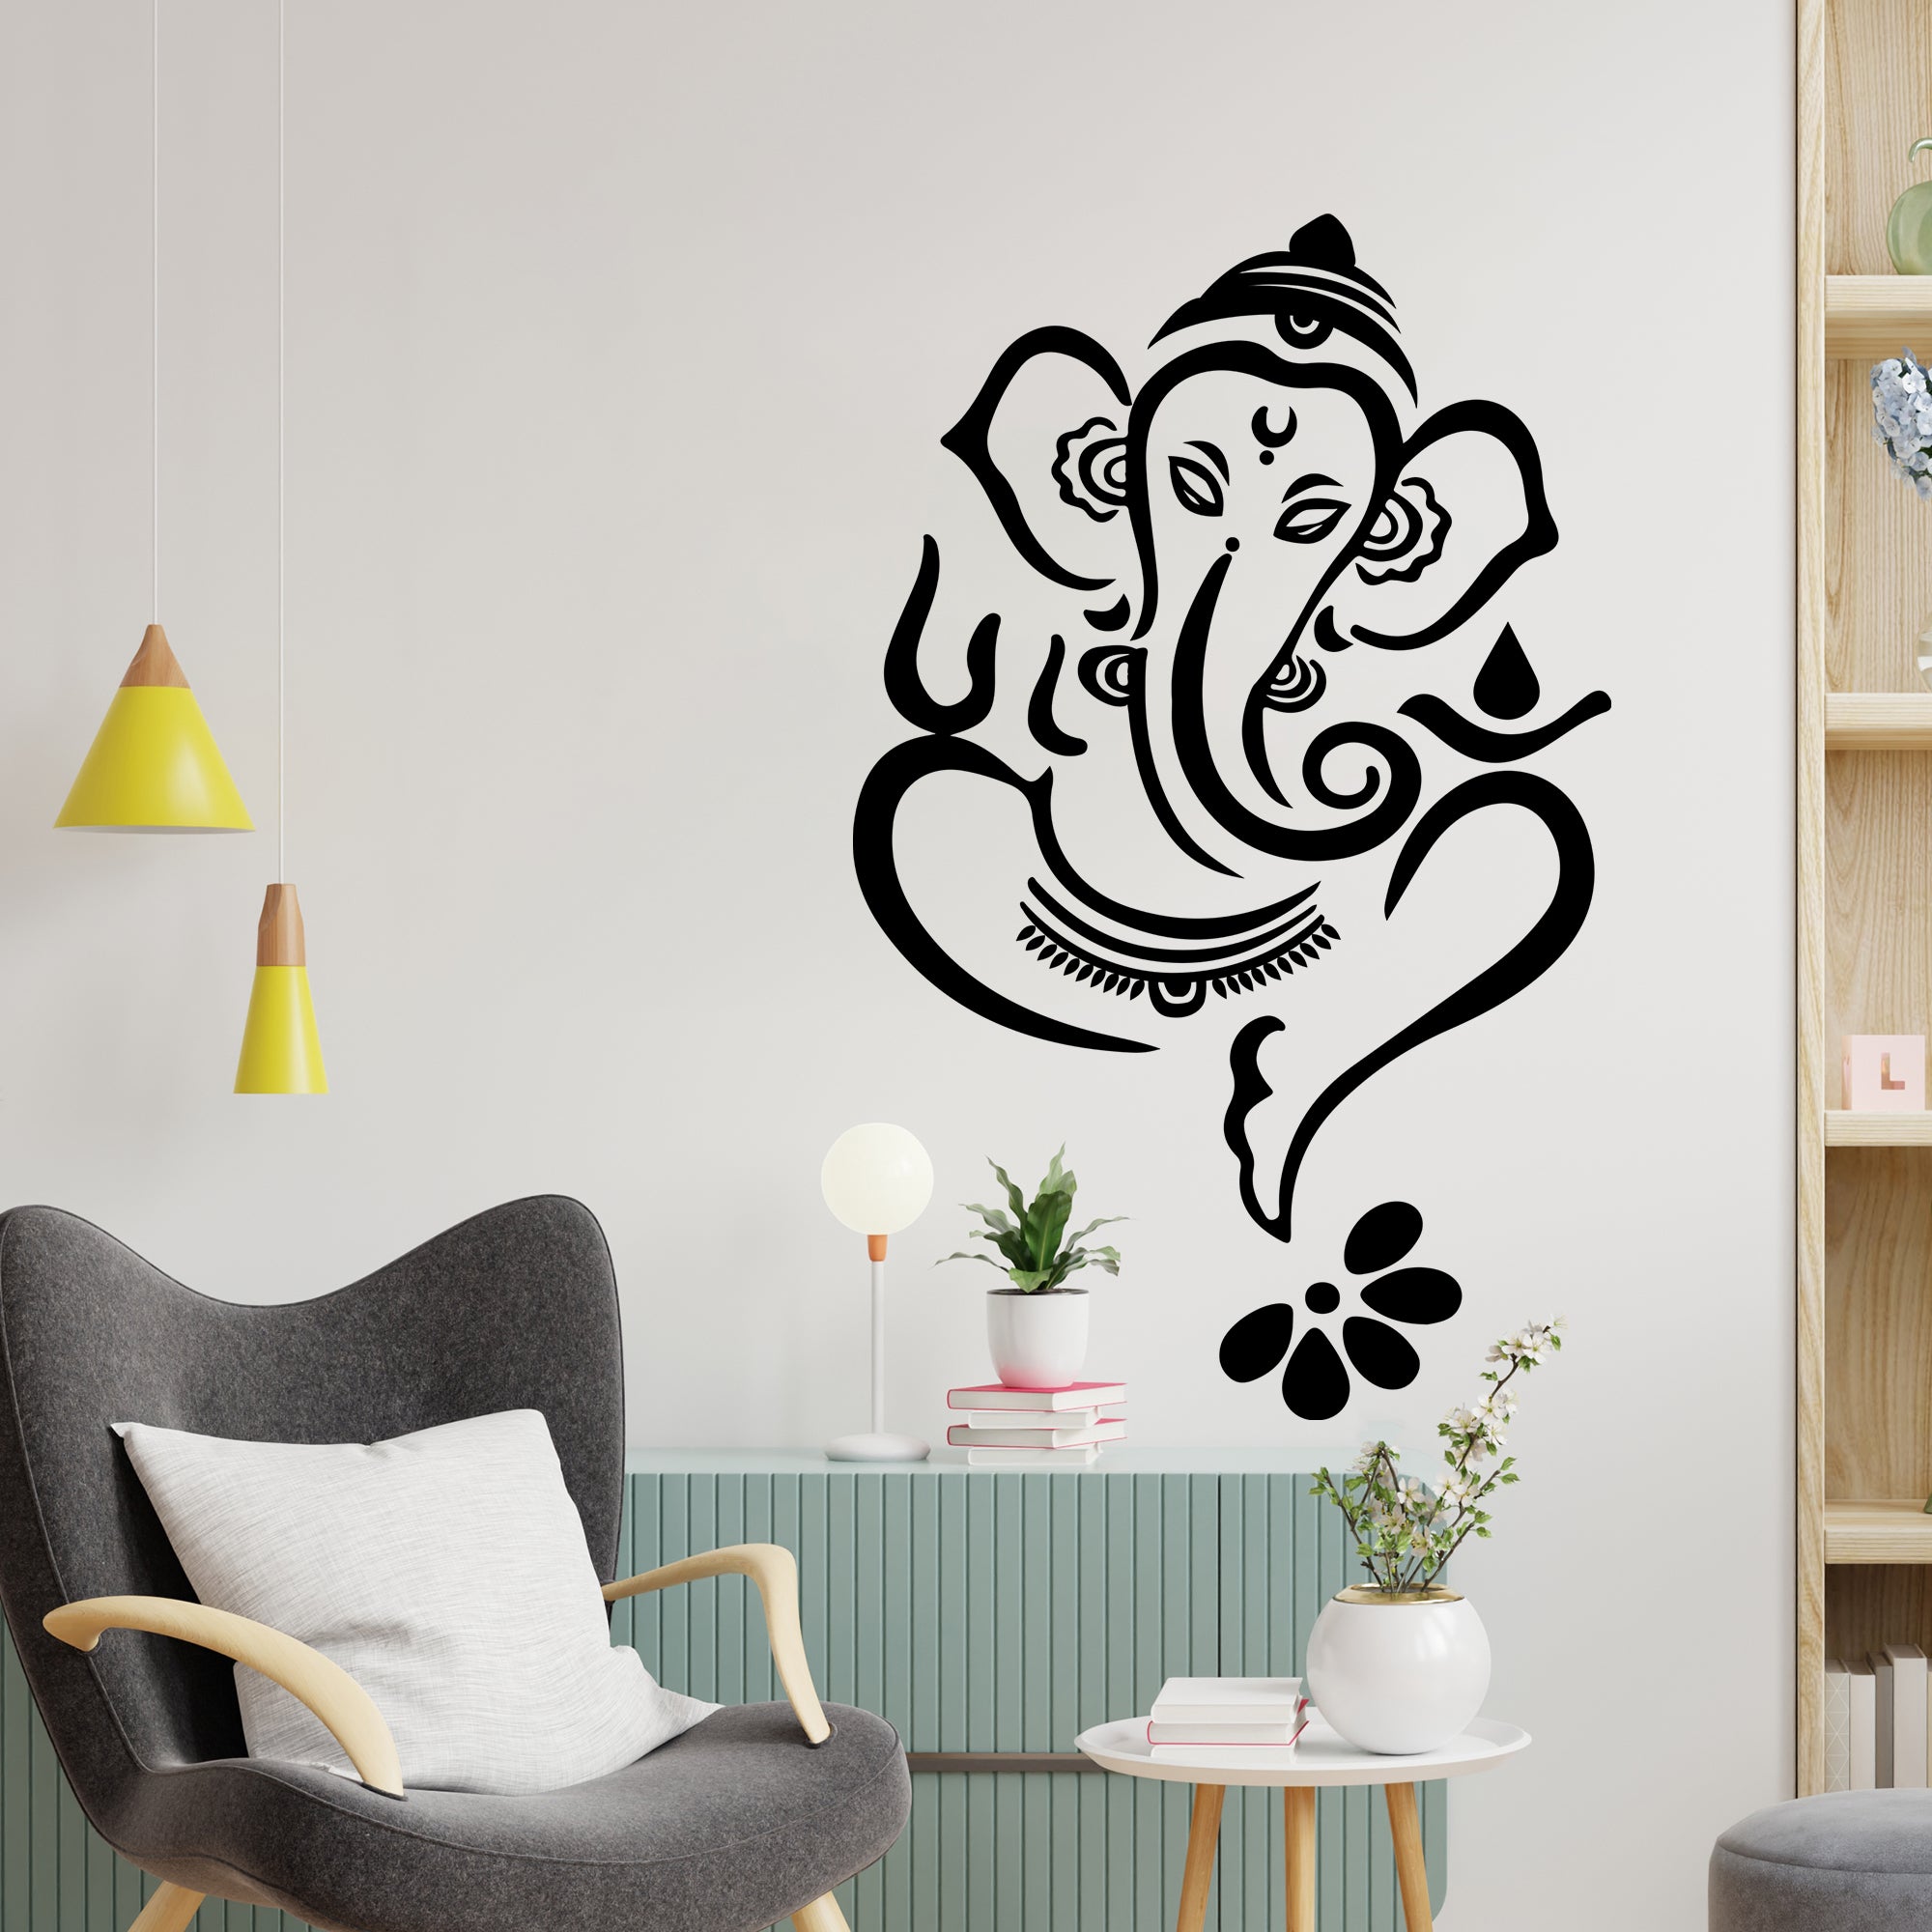 Lord Ganesha Wall Sticker for Home